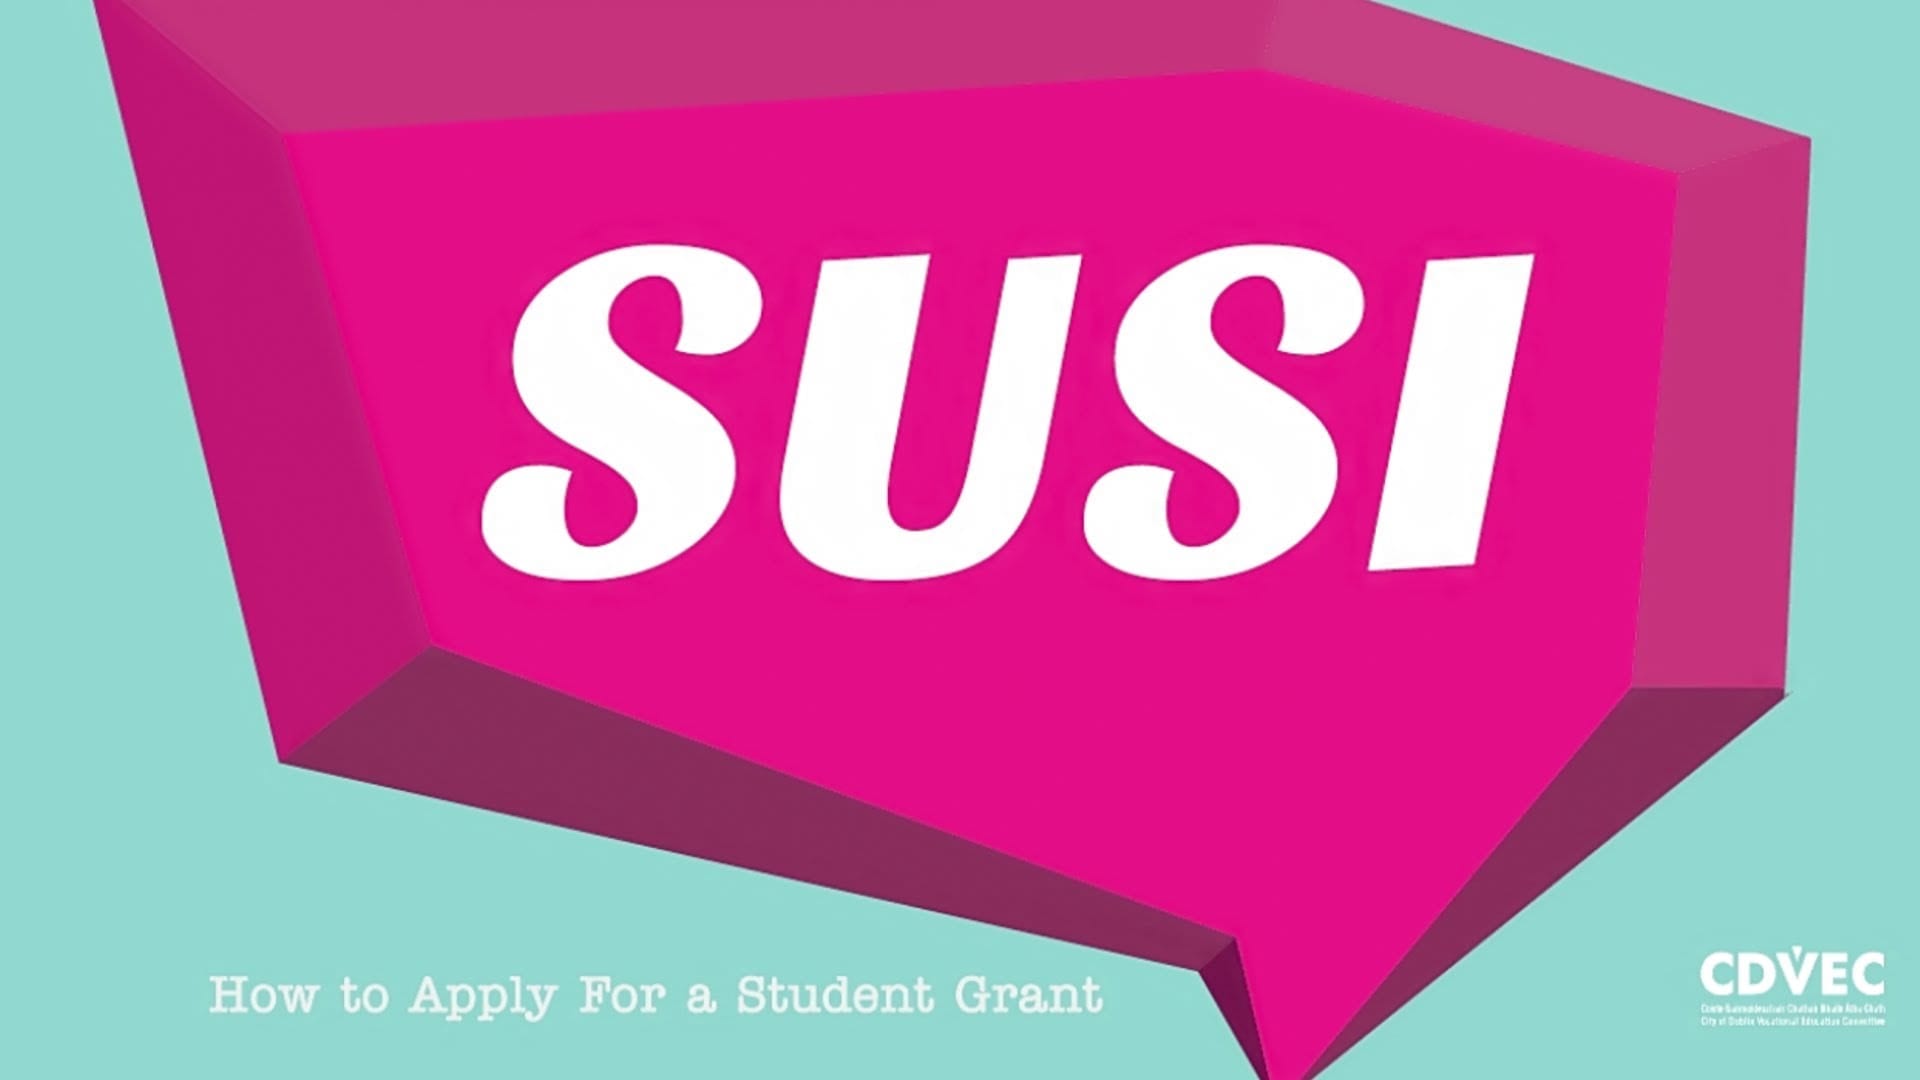 SUSI to open its online Student Grant Application System for 2014/2015 on 8 May, 2014.